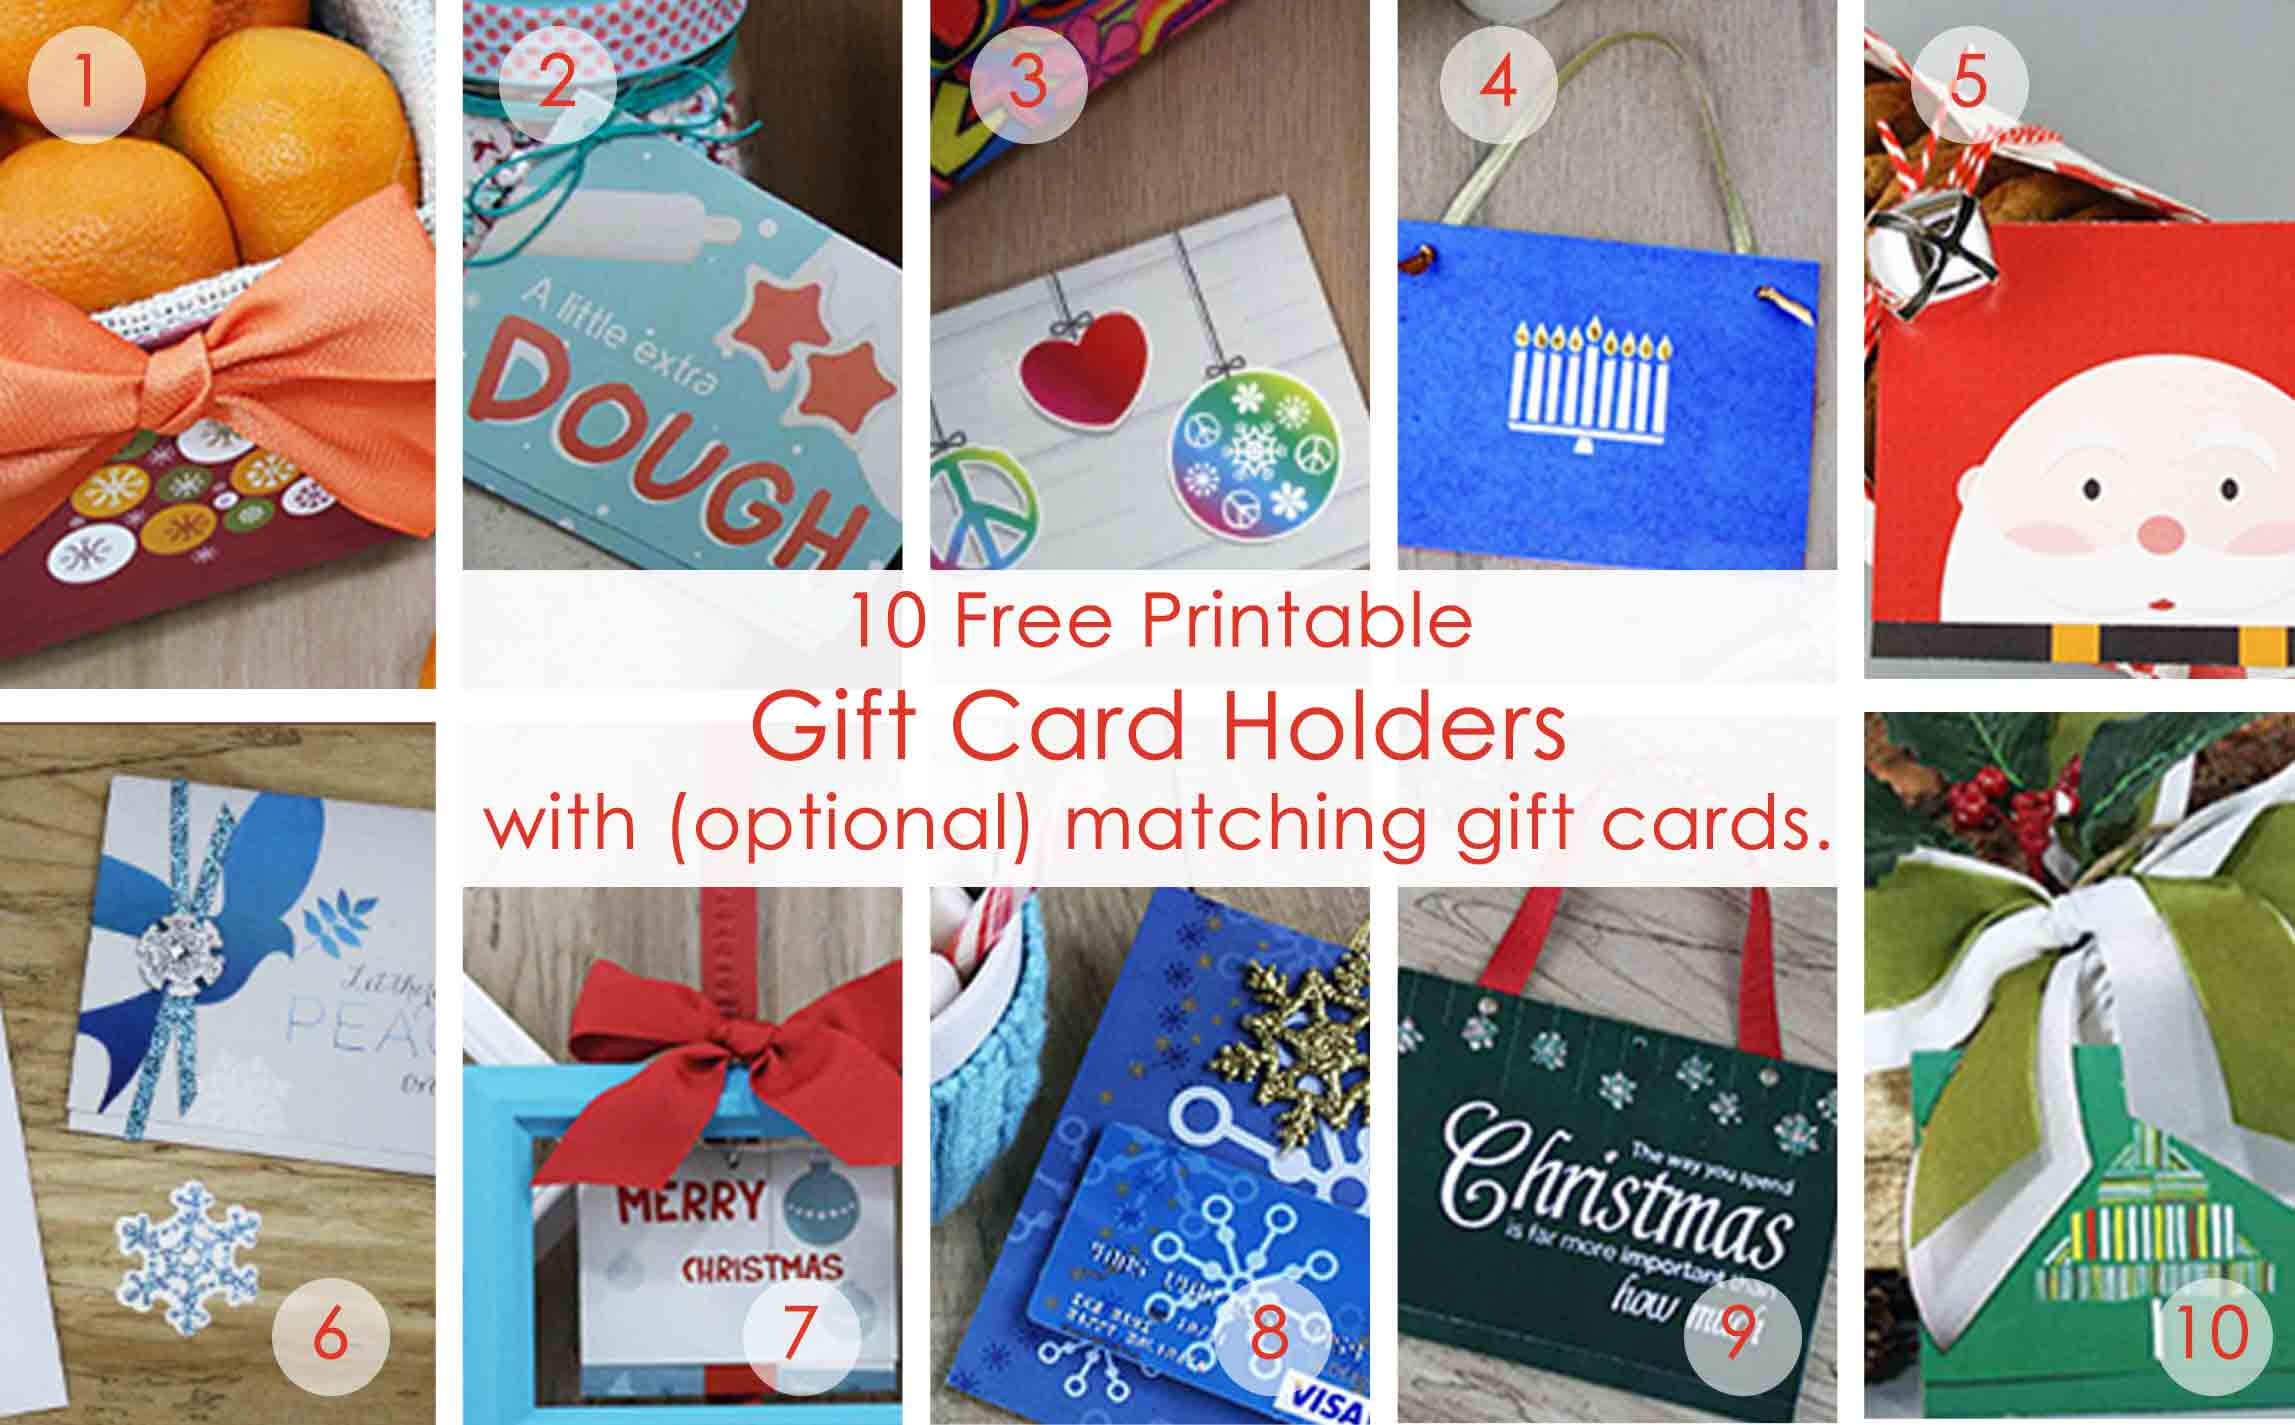 Over 50 Printable Gift Card Holders For The Holidays | Gcg Inside Homemade Christmas Gift Certificates Templates